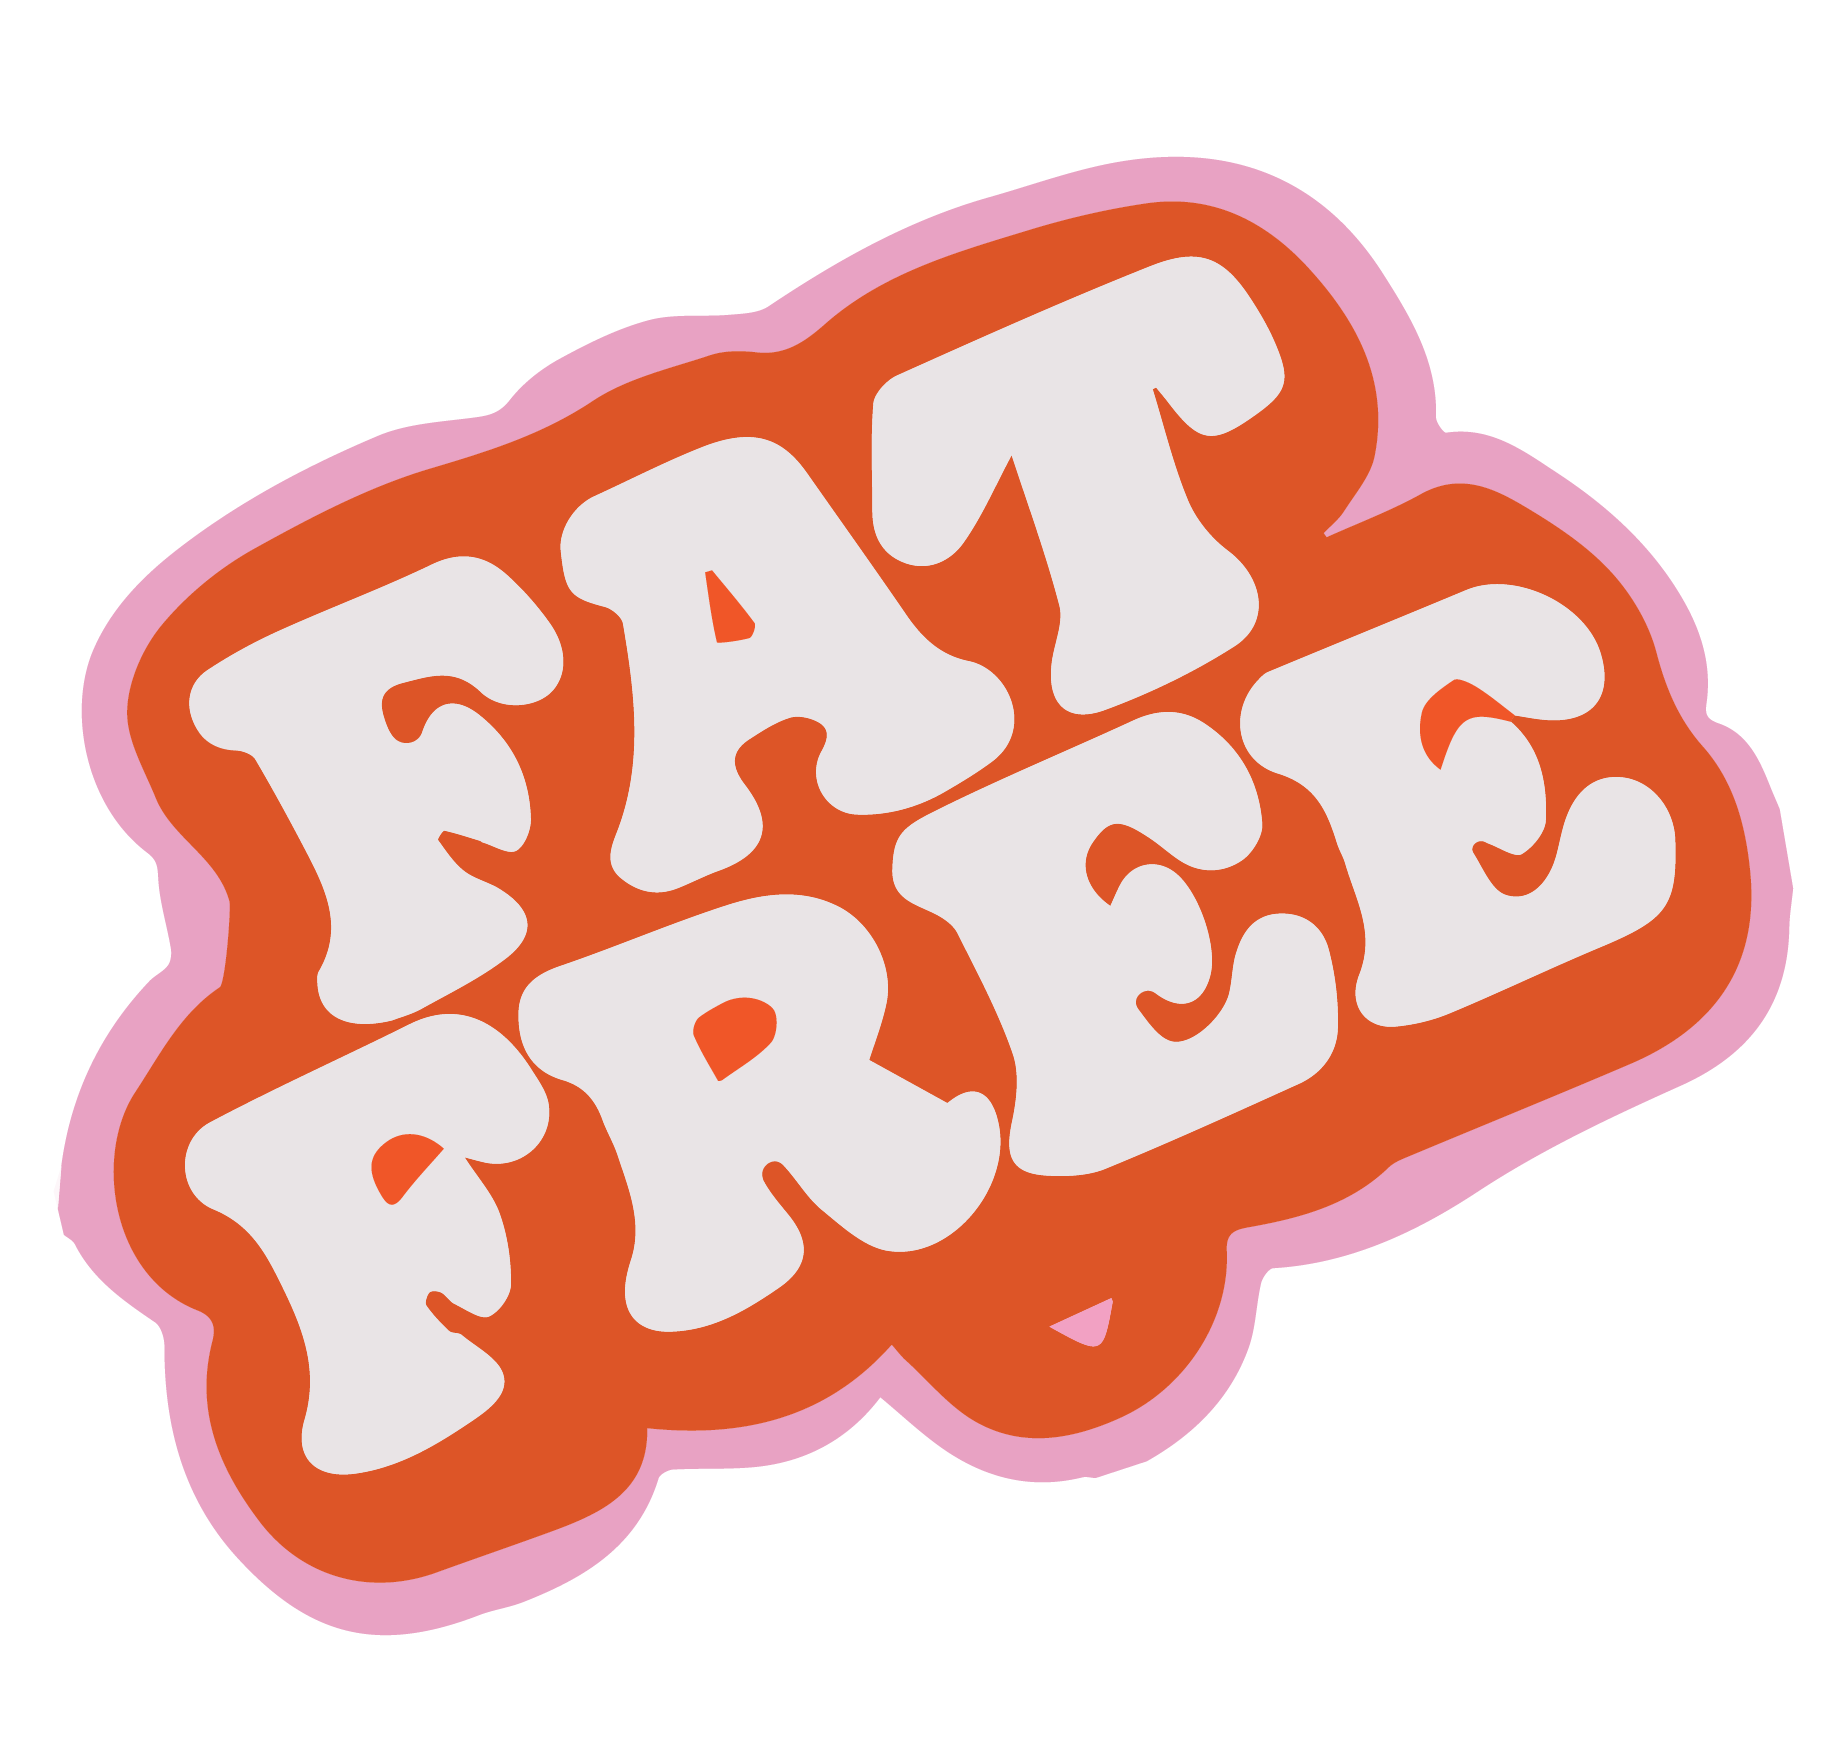 Bold-lettered sticker that says Fat Free. Font is white and is outlined in red and pink.